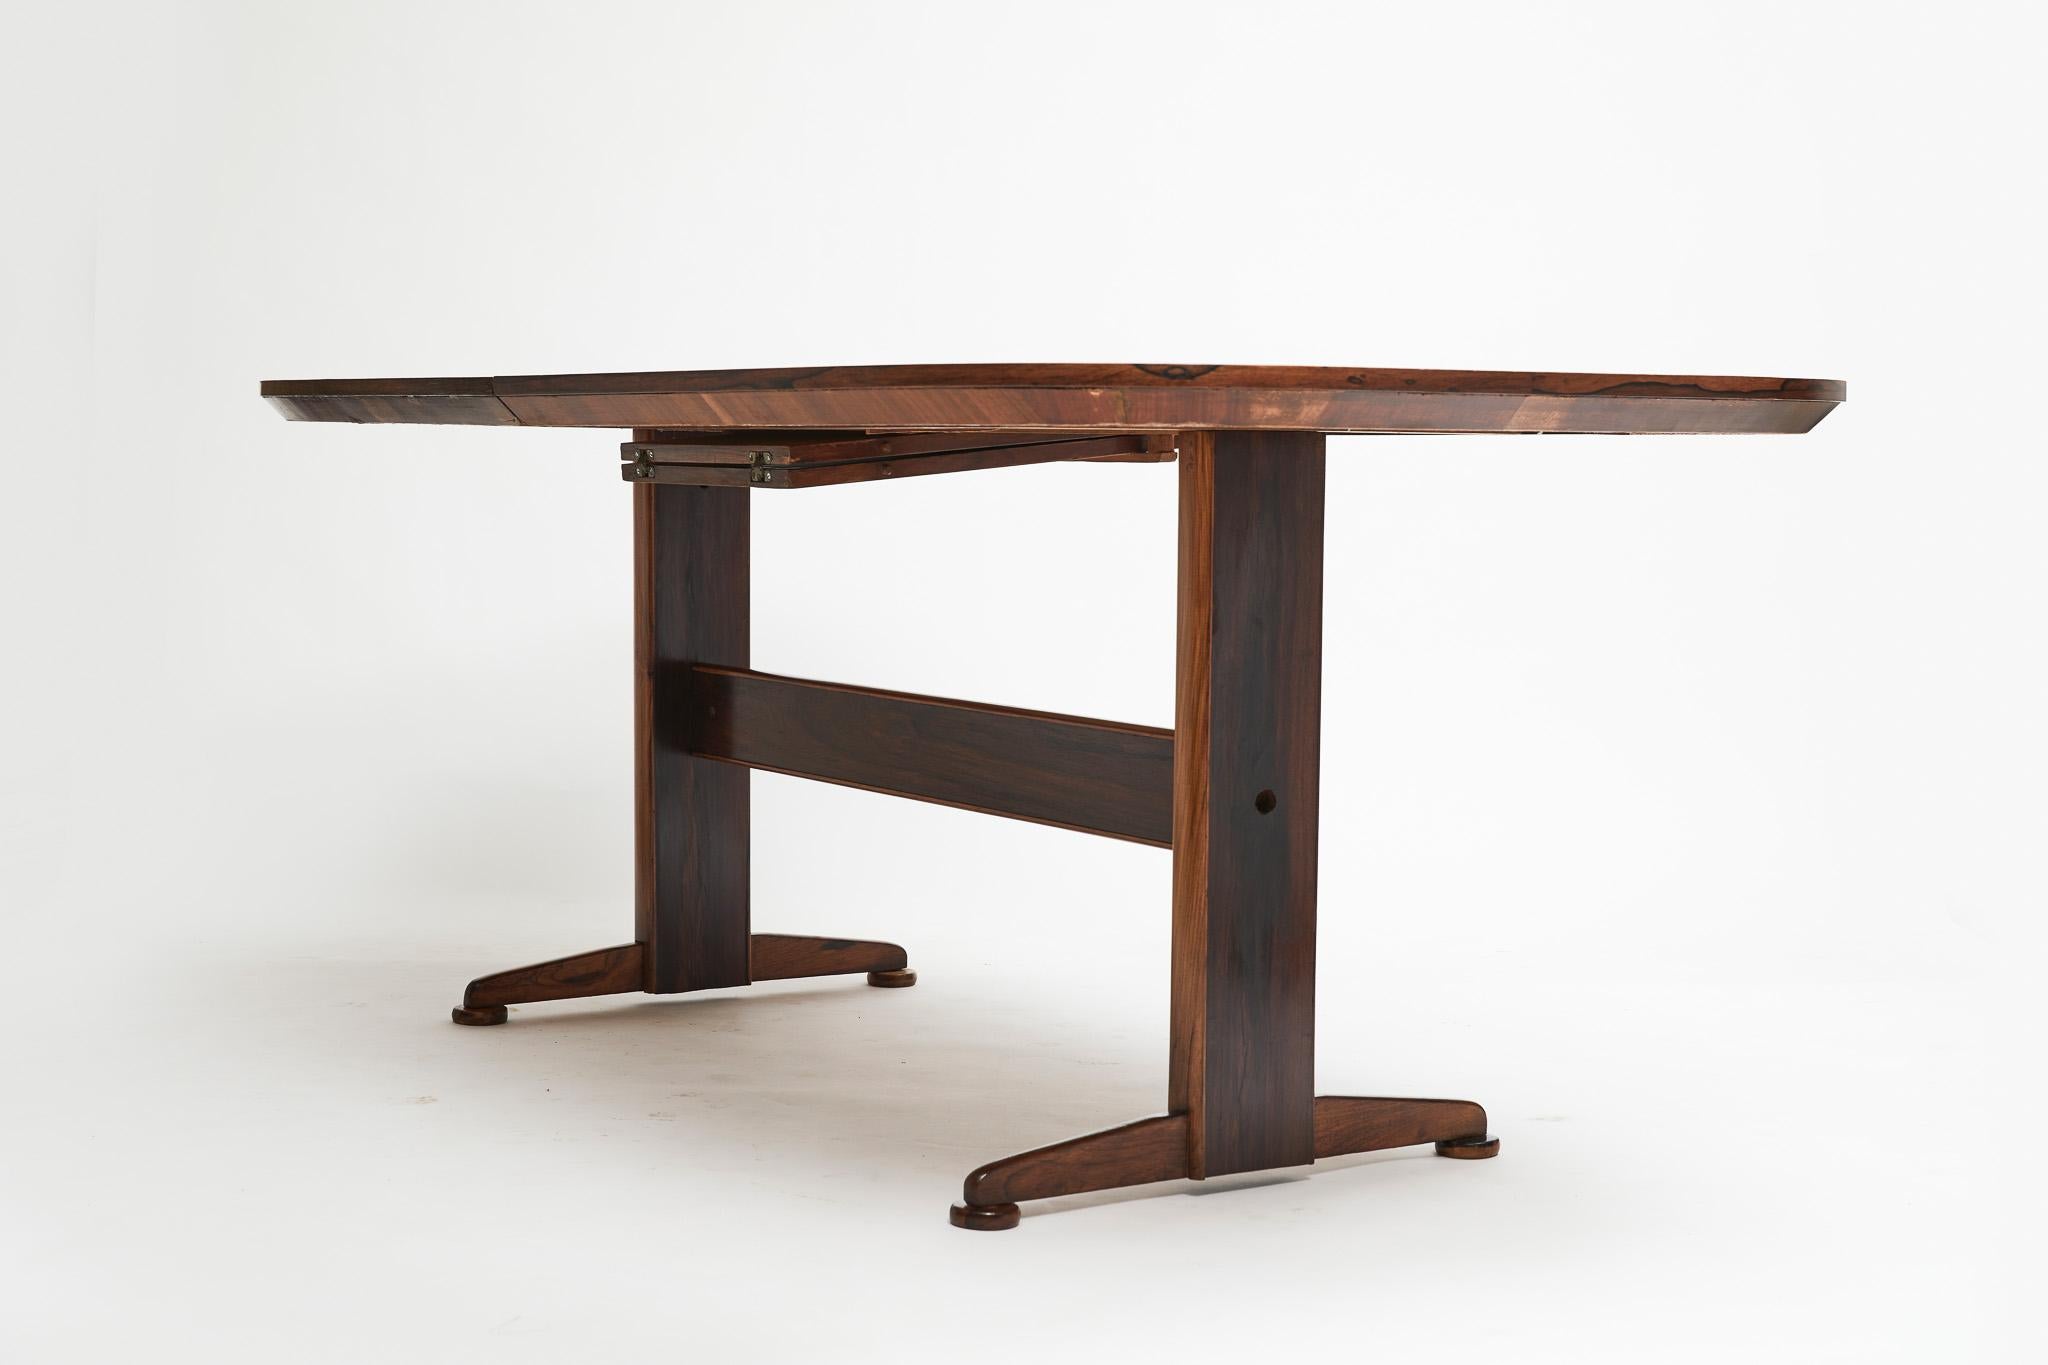 Hand-Crafted Mid-Century Modern Dining Table in Hardwood by Novo Rumo, 1960s, Brazil